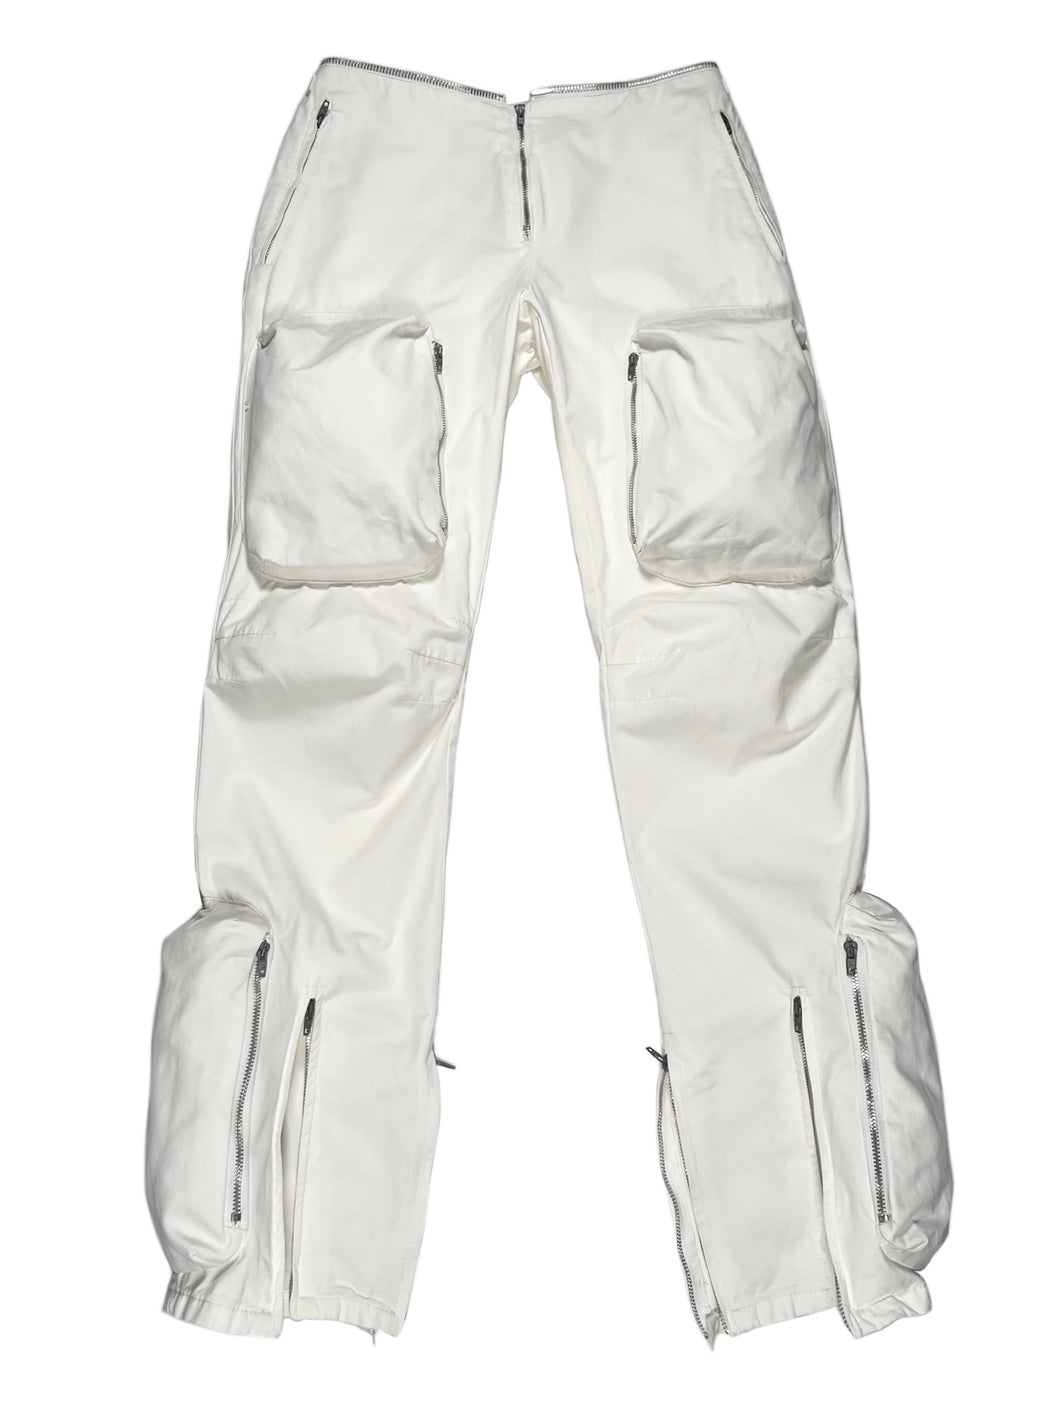 AW1999 Helmut Lang astro cargo pants